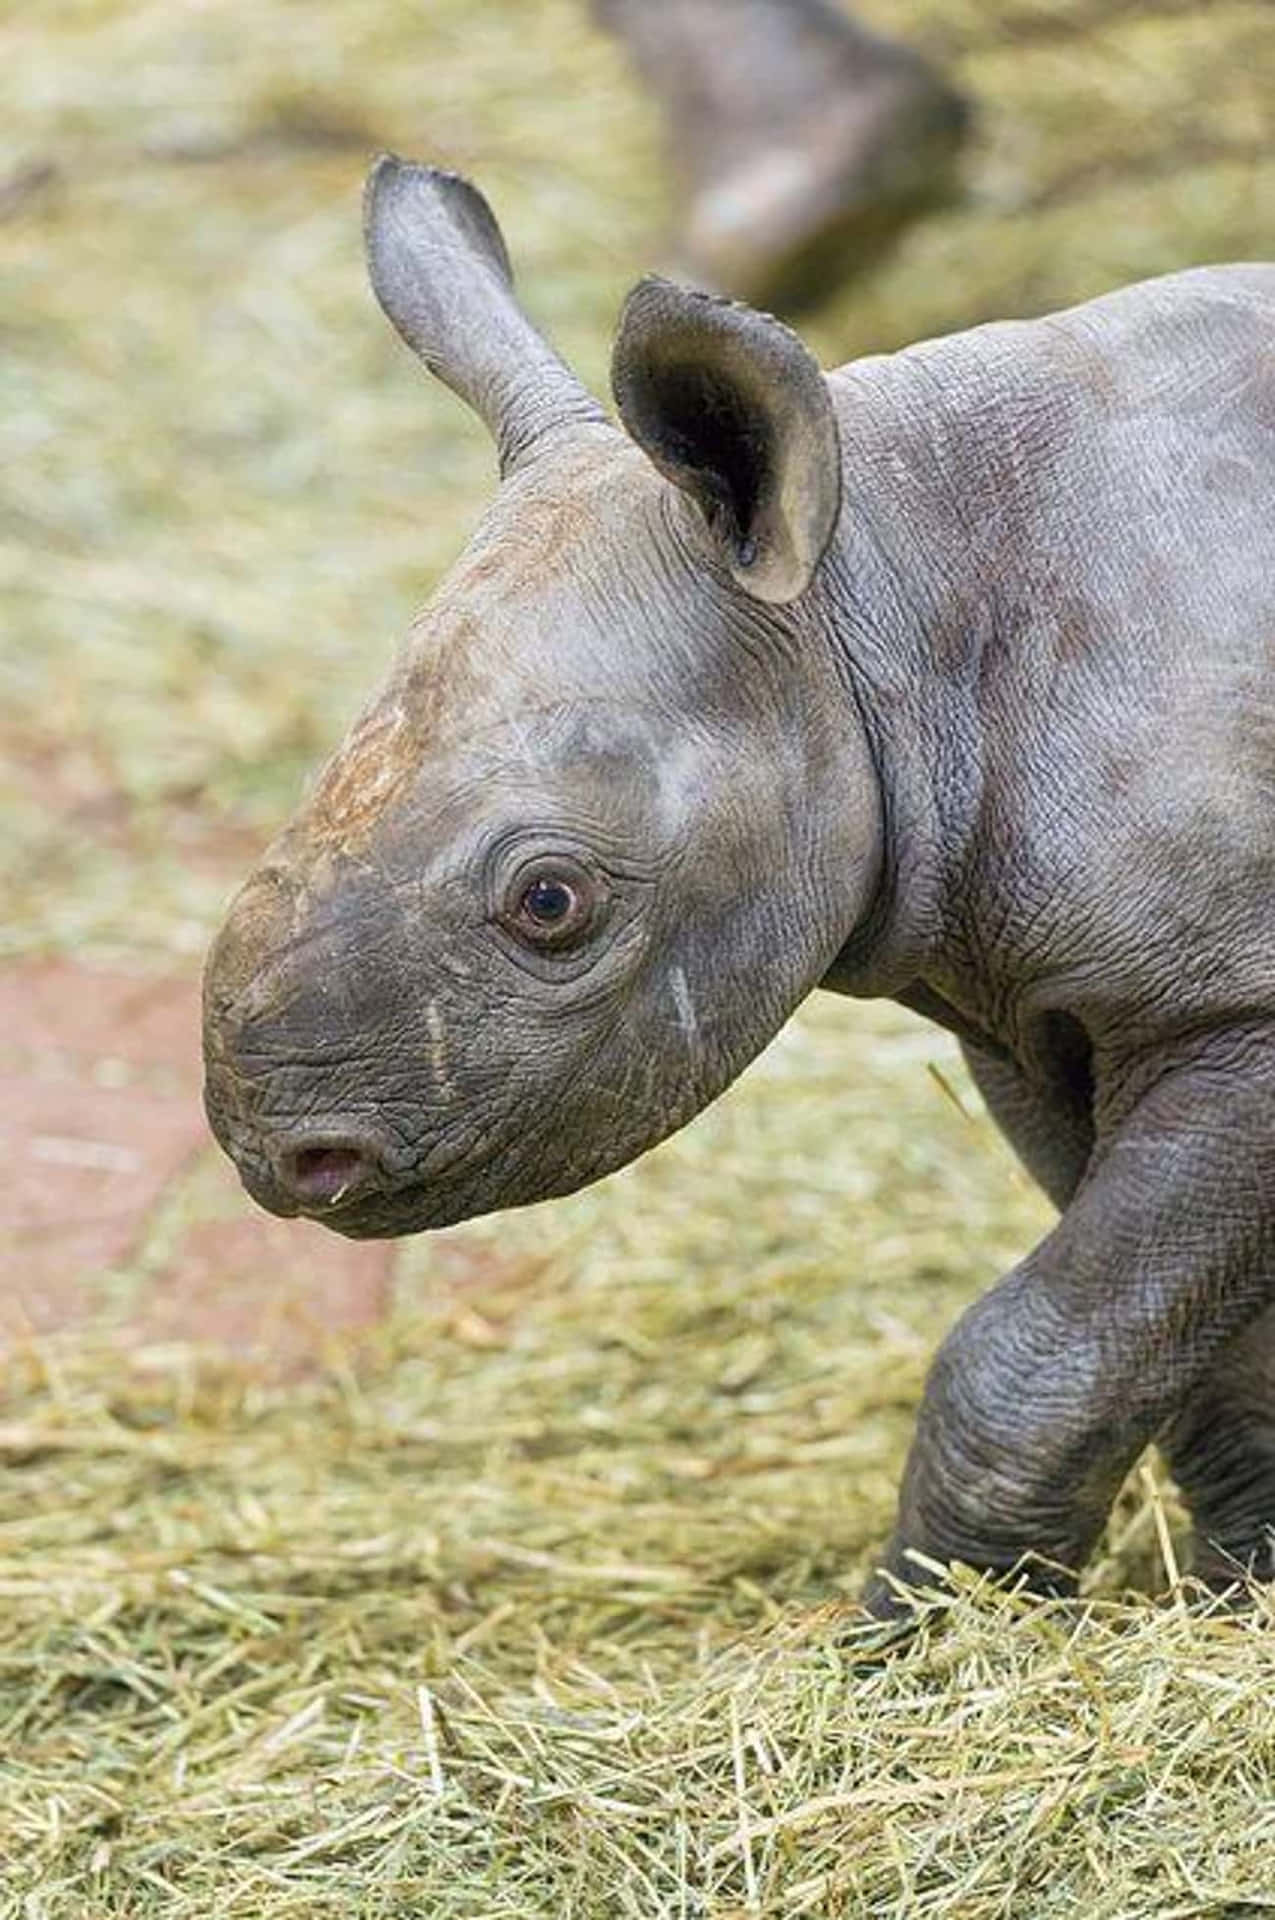 Even the Ugliest of Animals is Beautiful in its Own Way